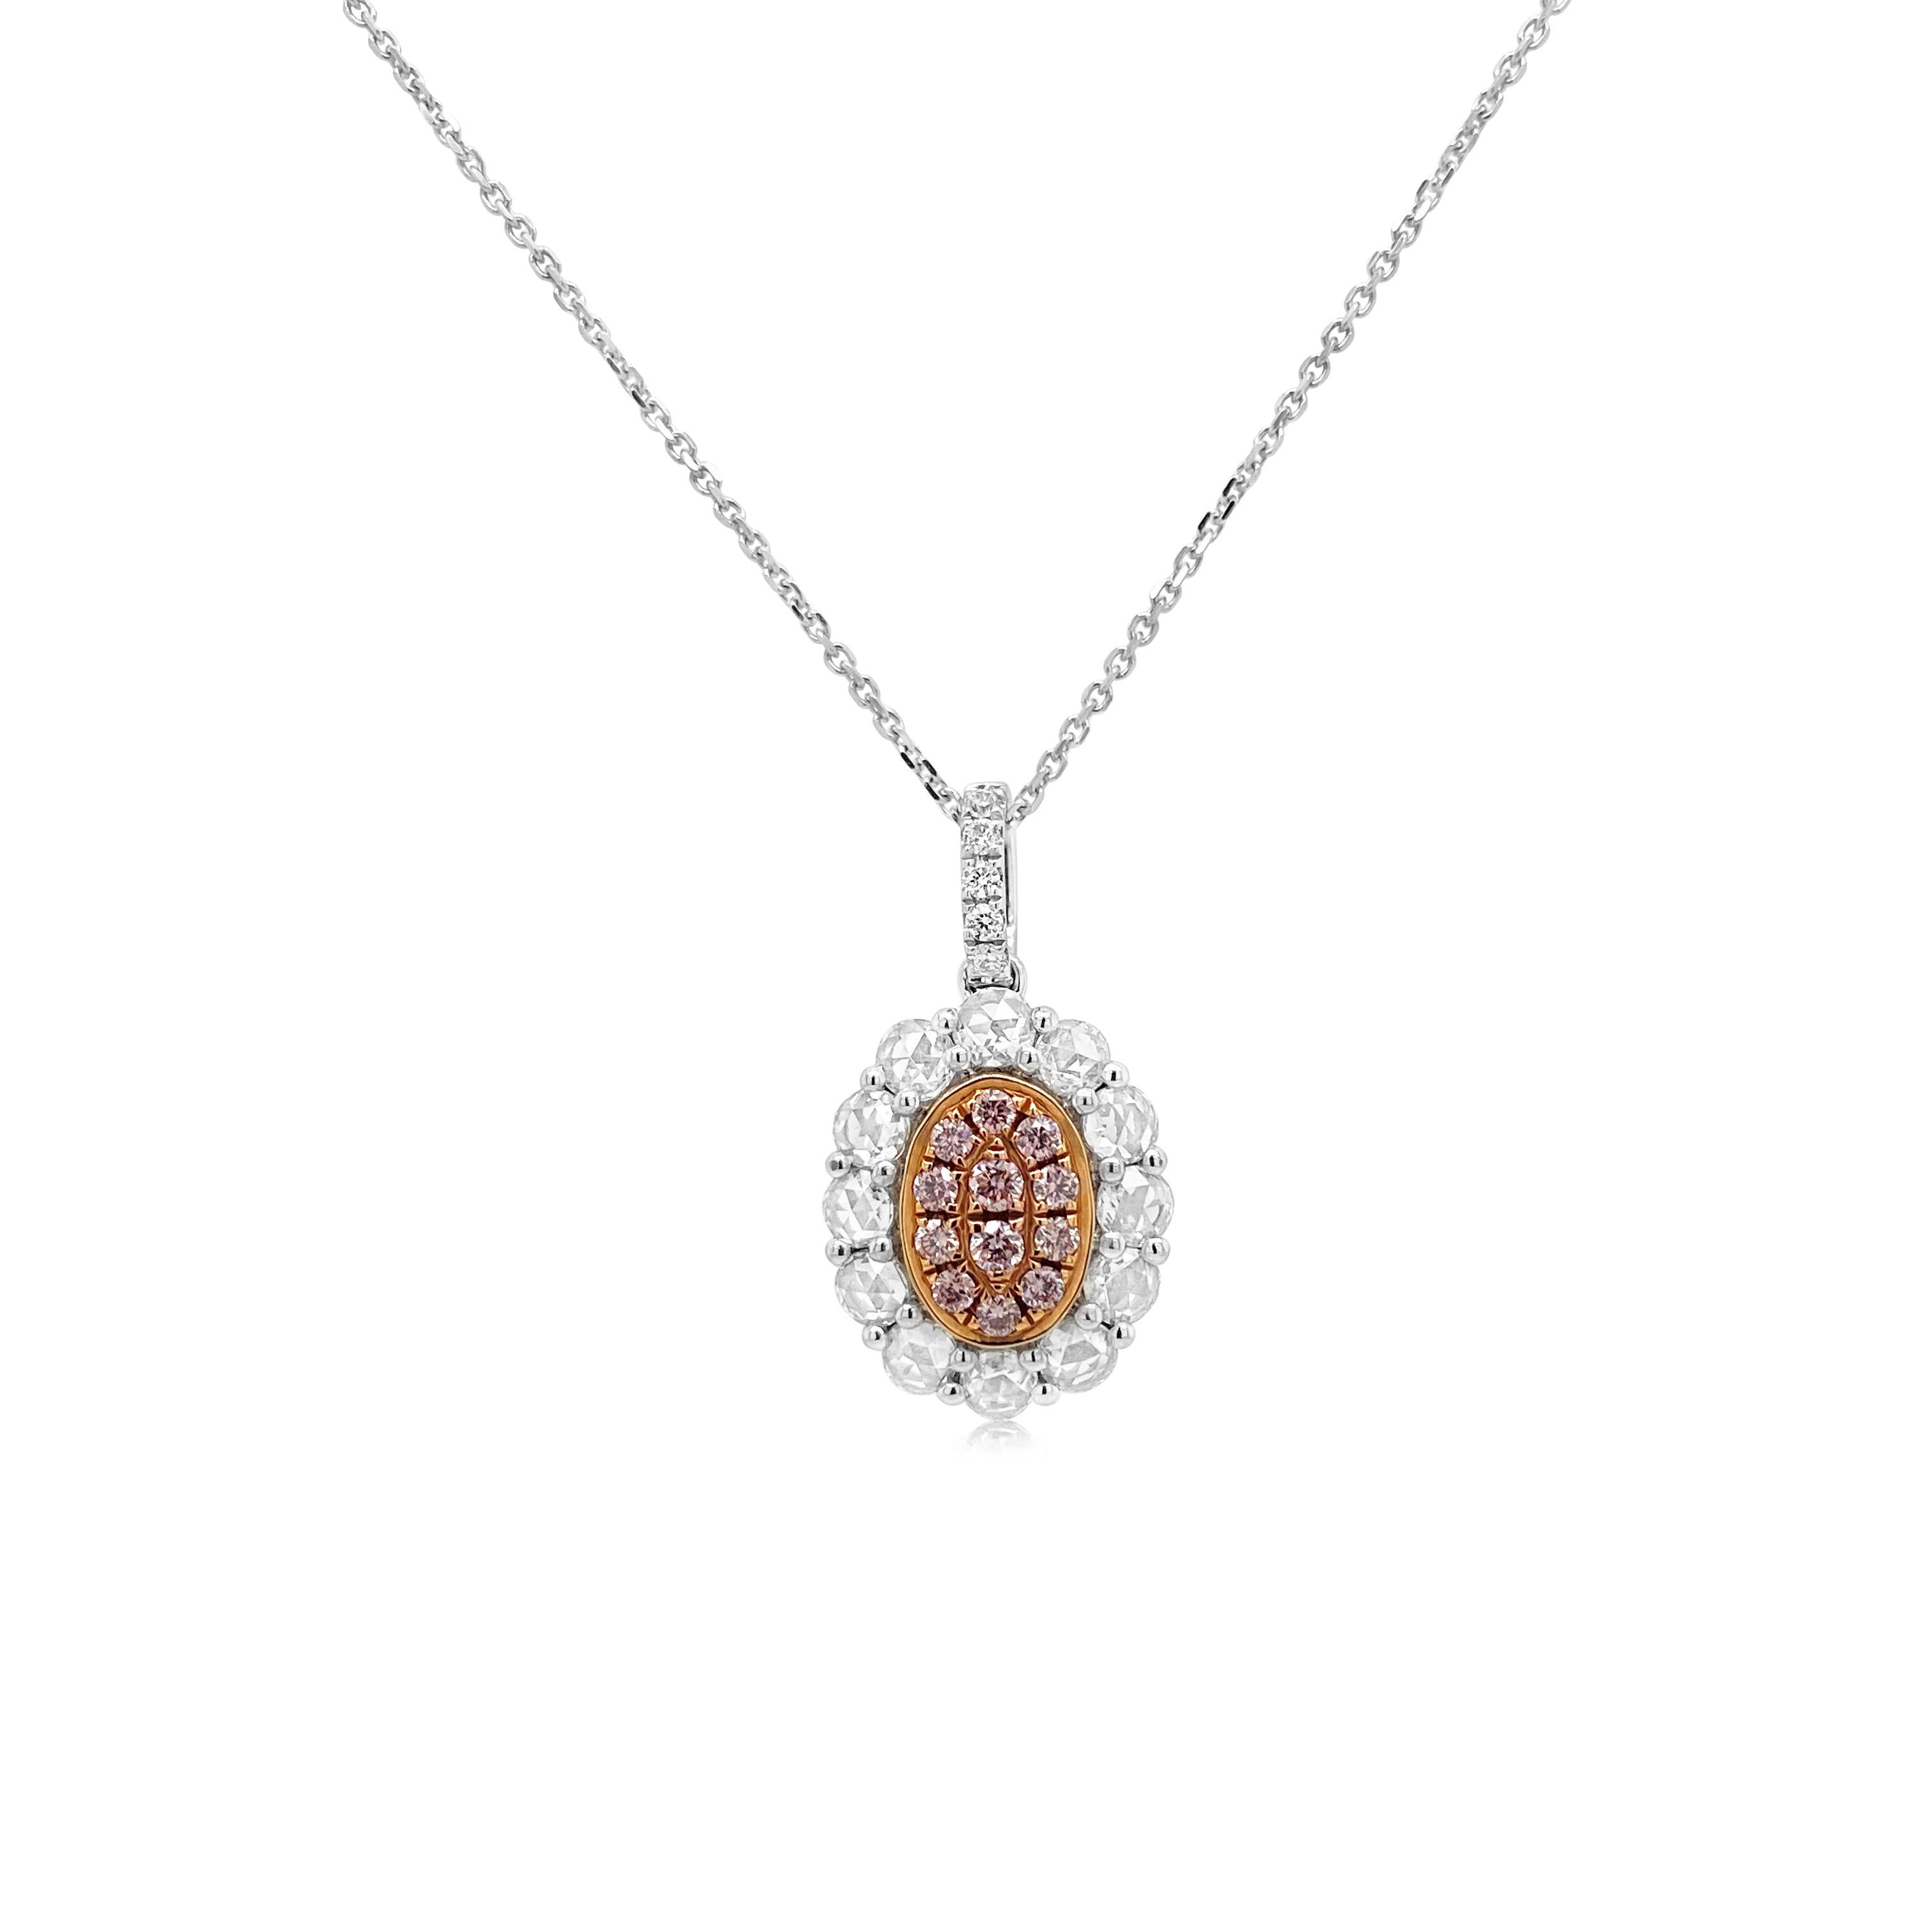 This oval shaped pendant showcases rare Argyle Pink diamonds arranged symmetrically , surrounded by petal like rose-cut diamonds giving the piece a vivacious and modern charm.
-	Round Brilliant Cut Argyle Pink Diamonds total 0.15 carat
-	Rose-Cut